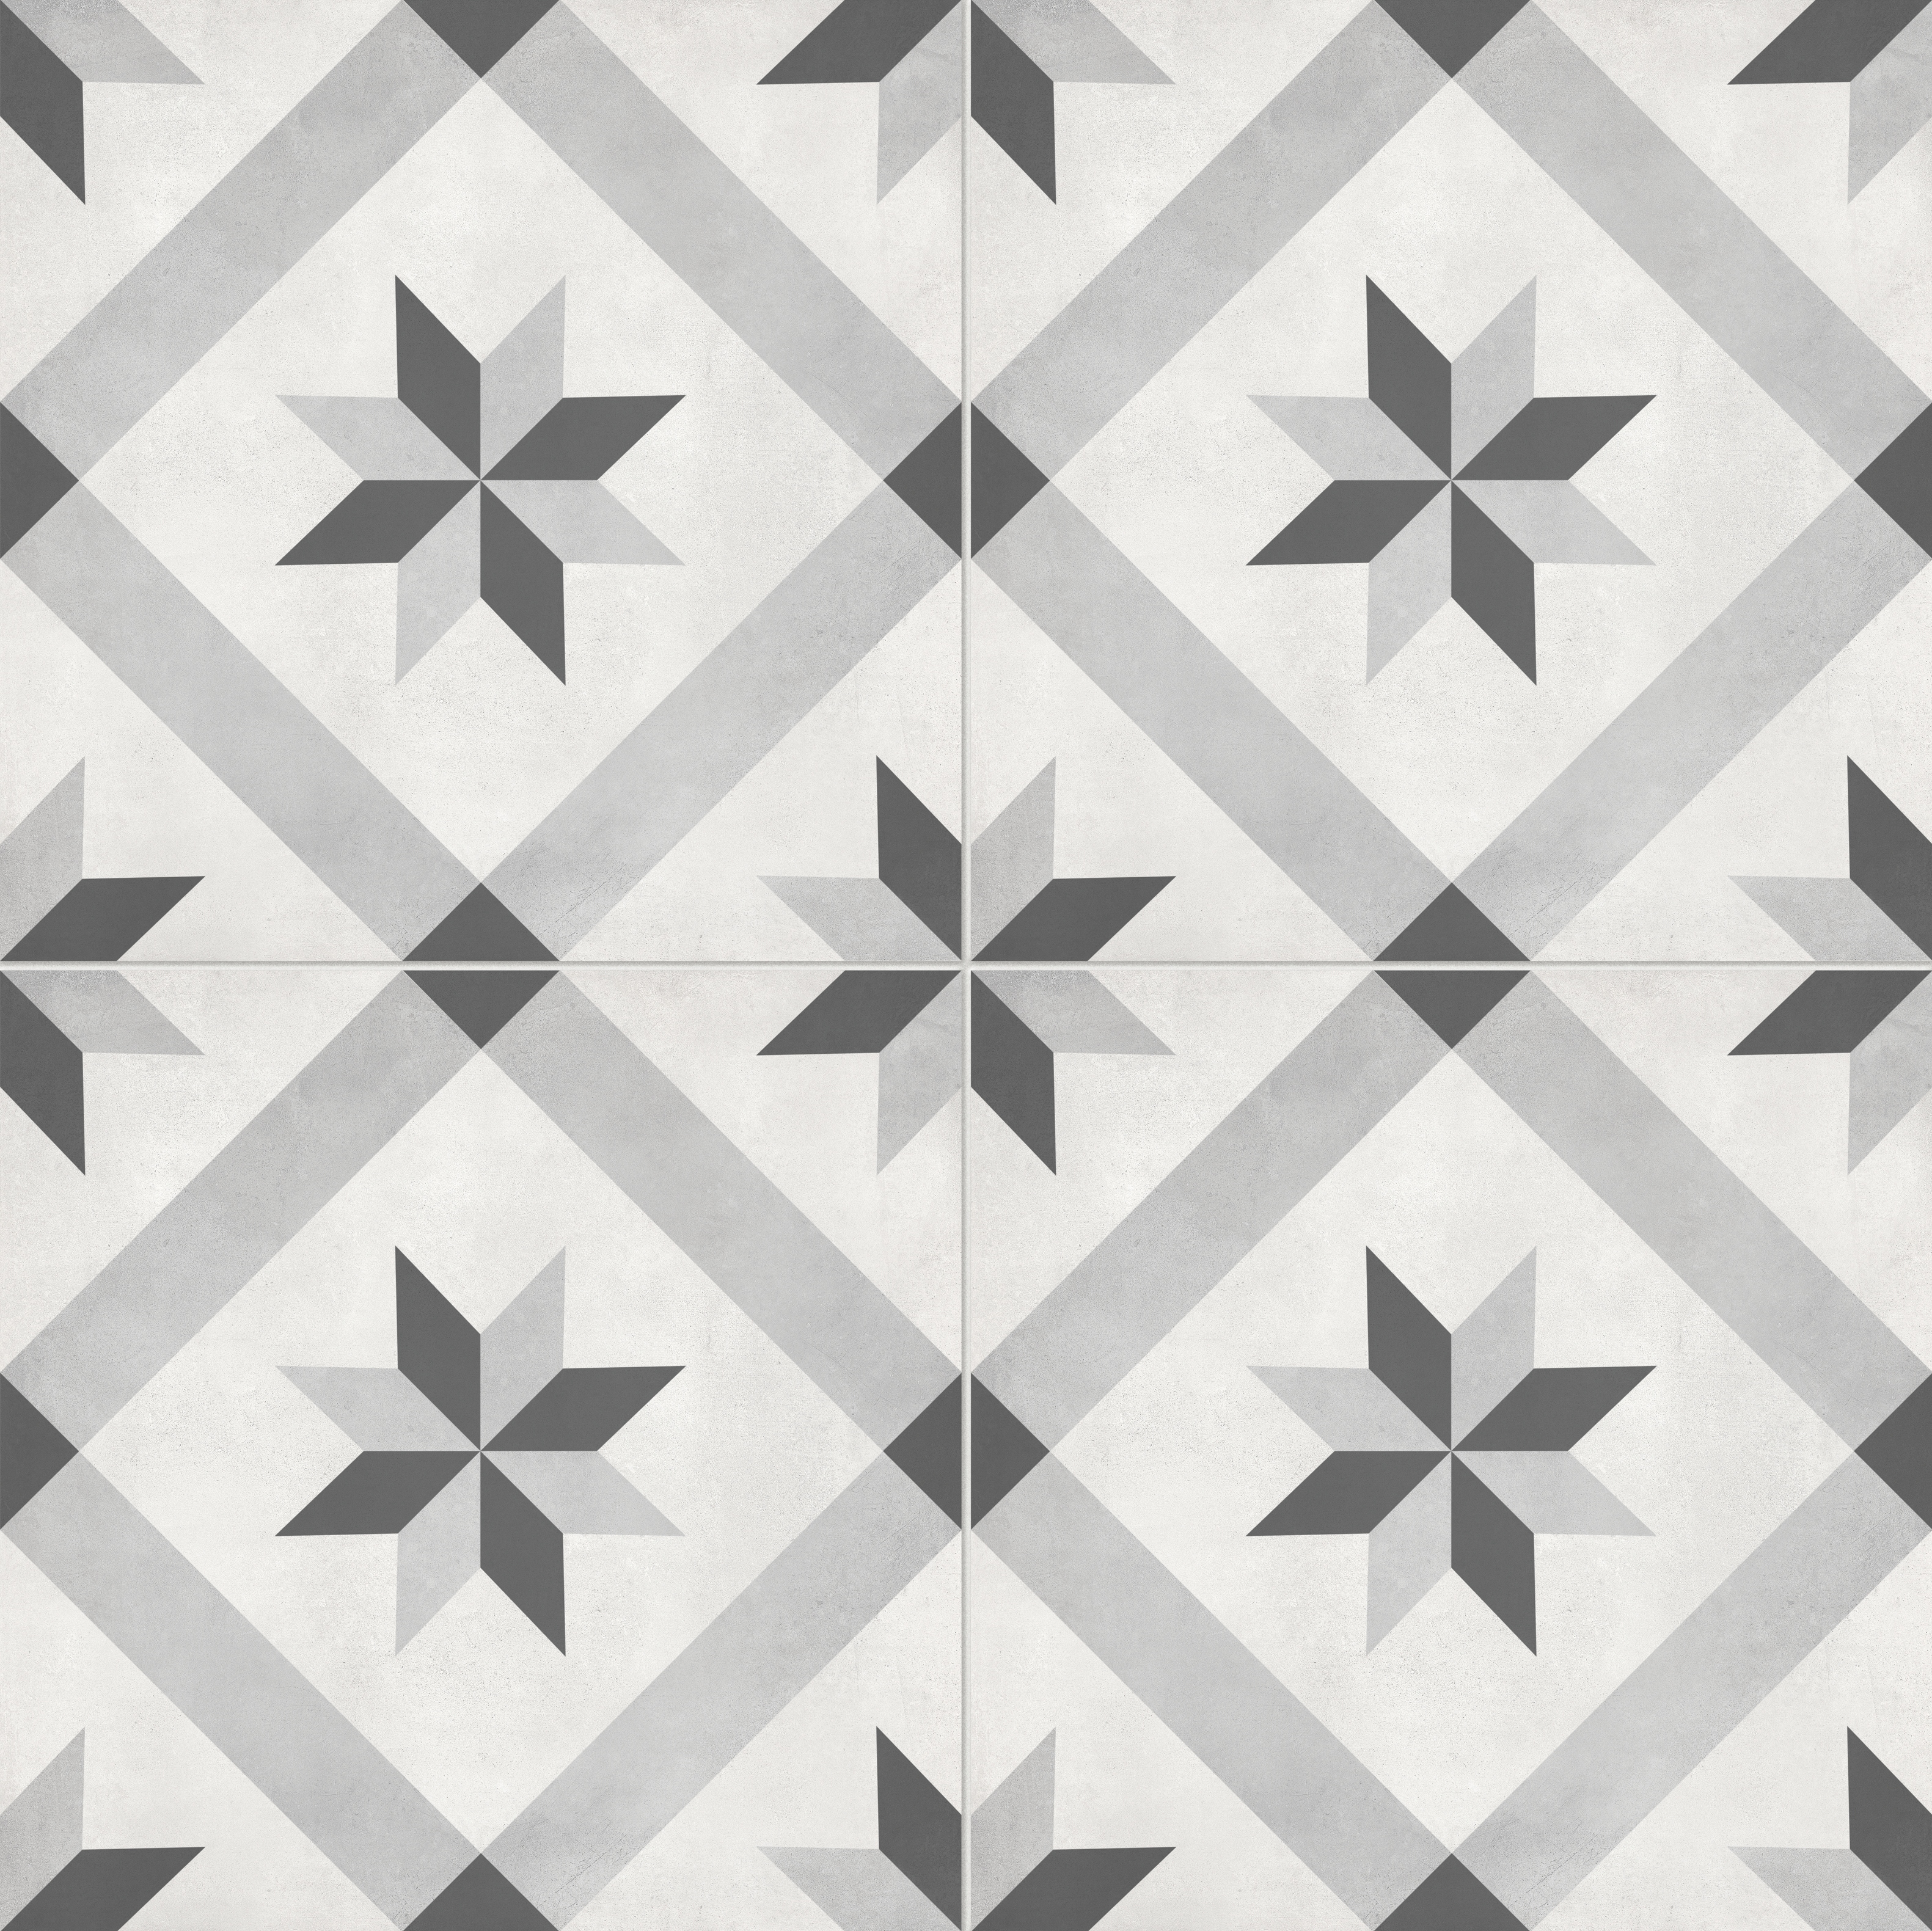 ice print pattern glazed porcelain deco tile print blend from form anatolia collection distributed by surface group international matte finish pressed edge 8x8 square shape